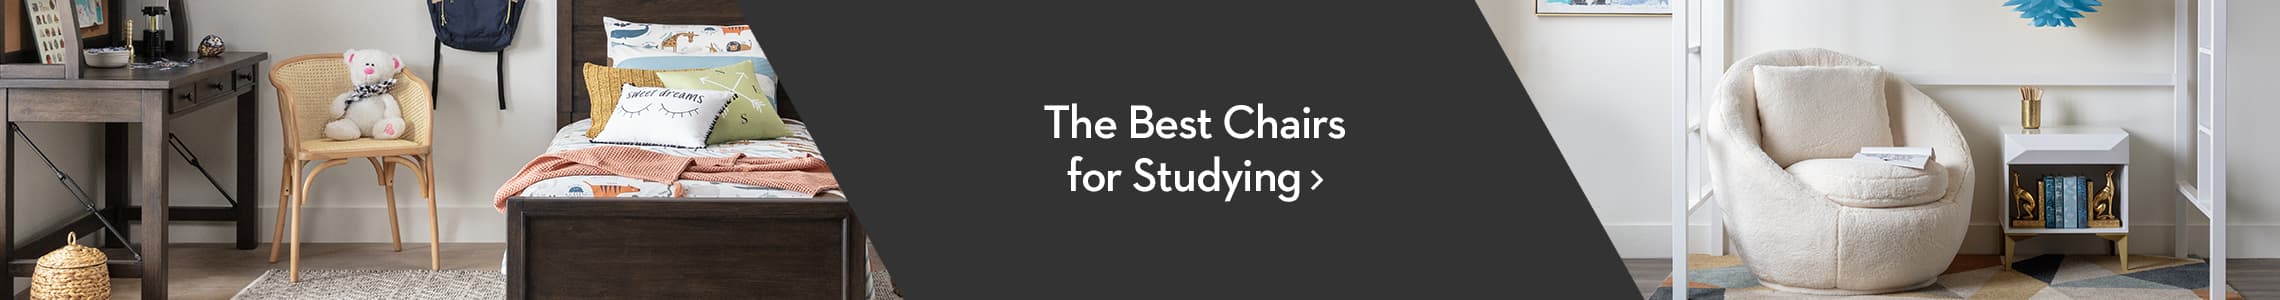 the best chairs for studying